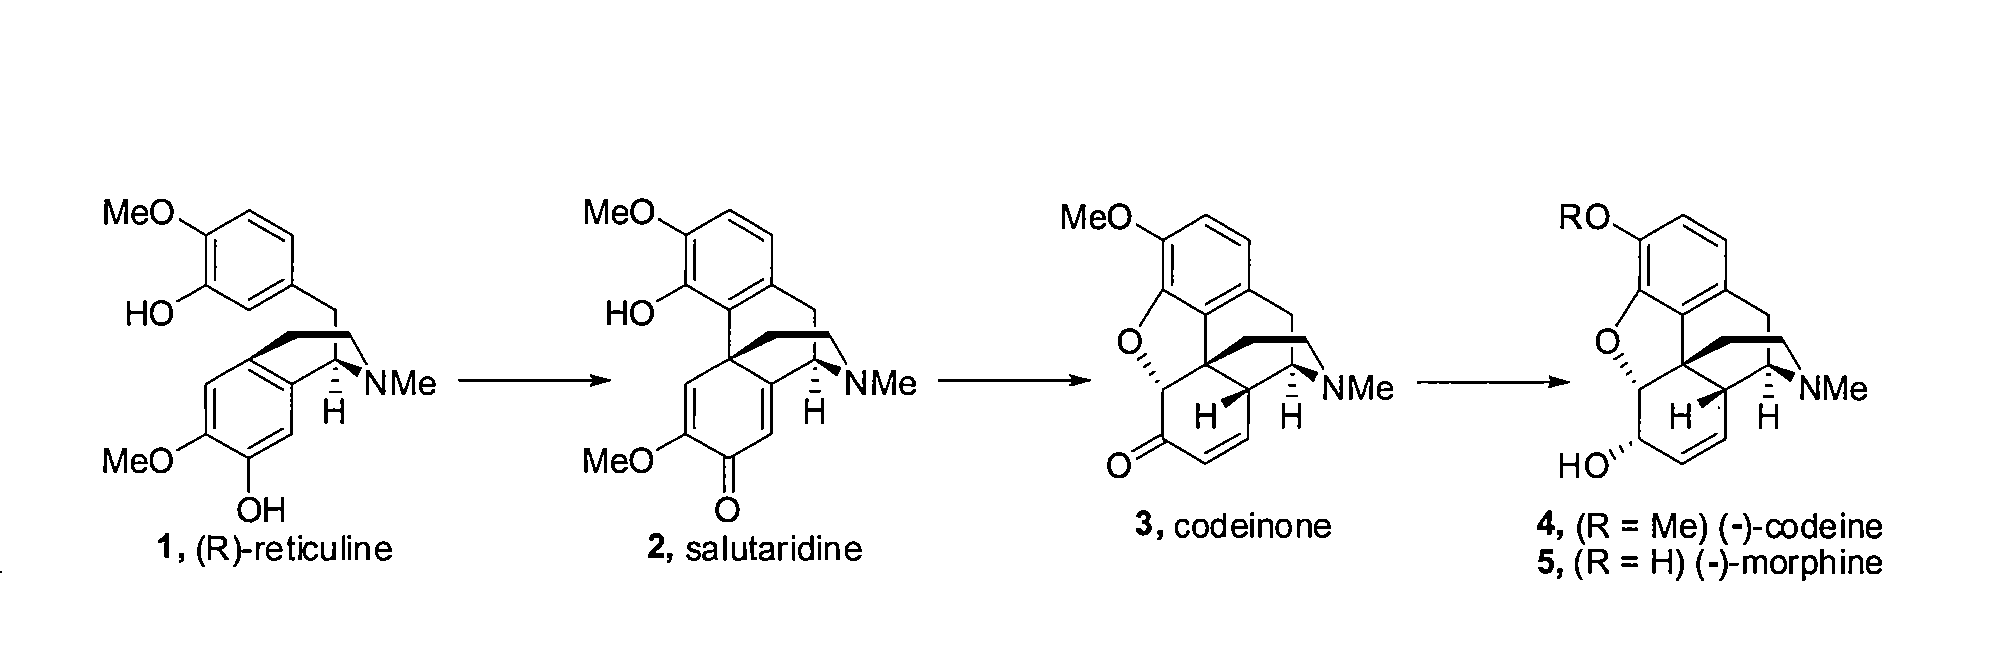 Efficient Synthesis Of Morphine And Codeine